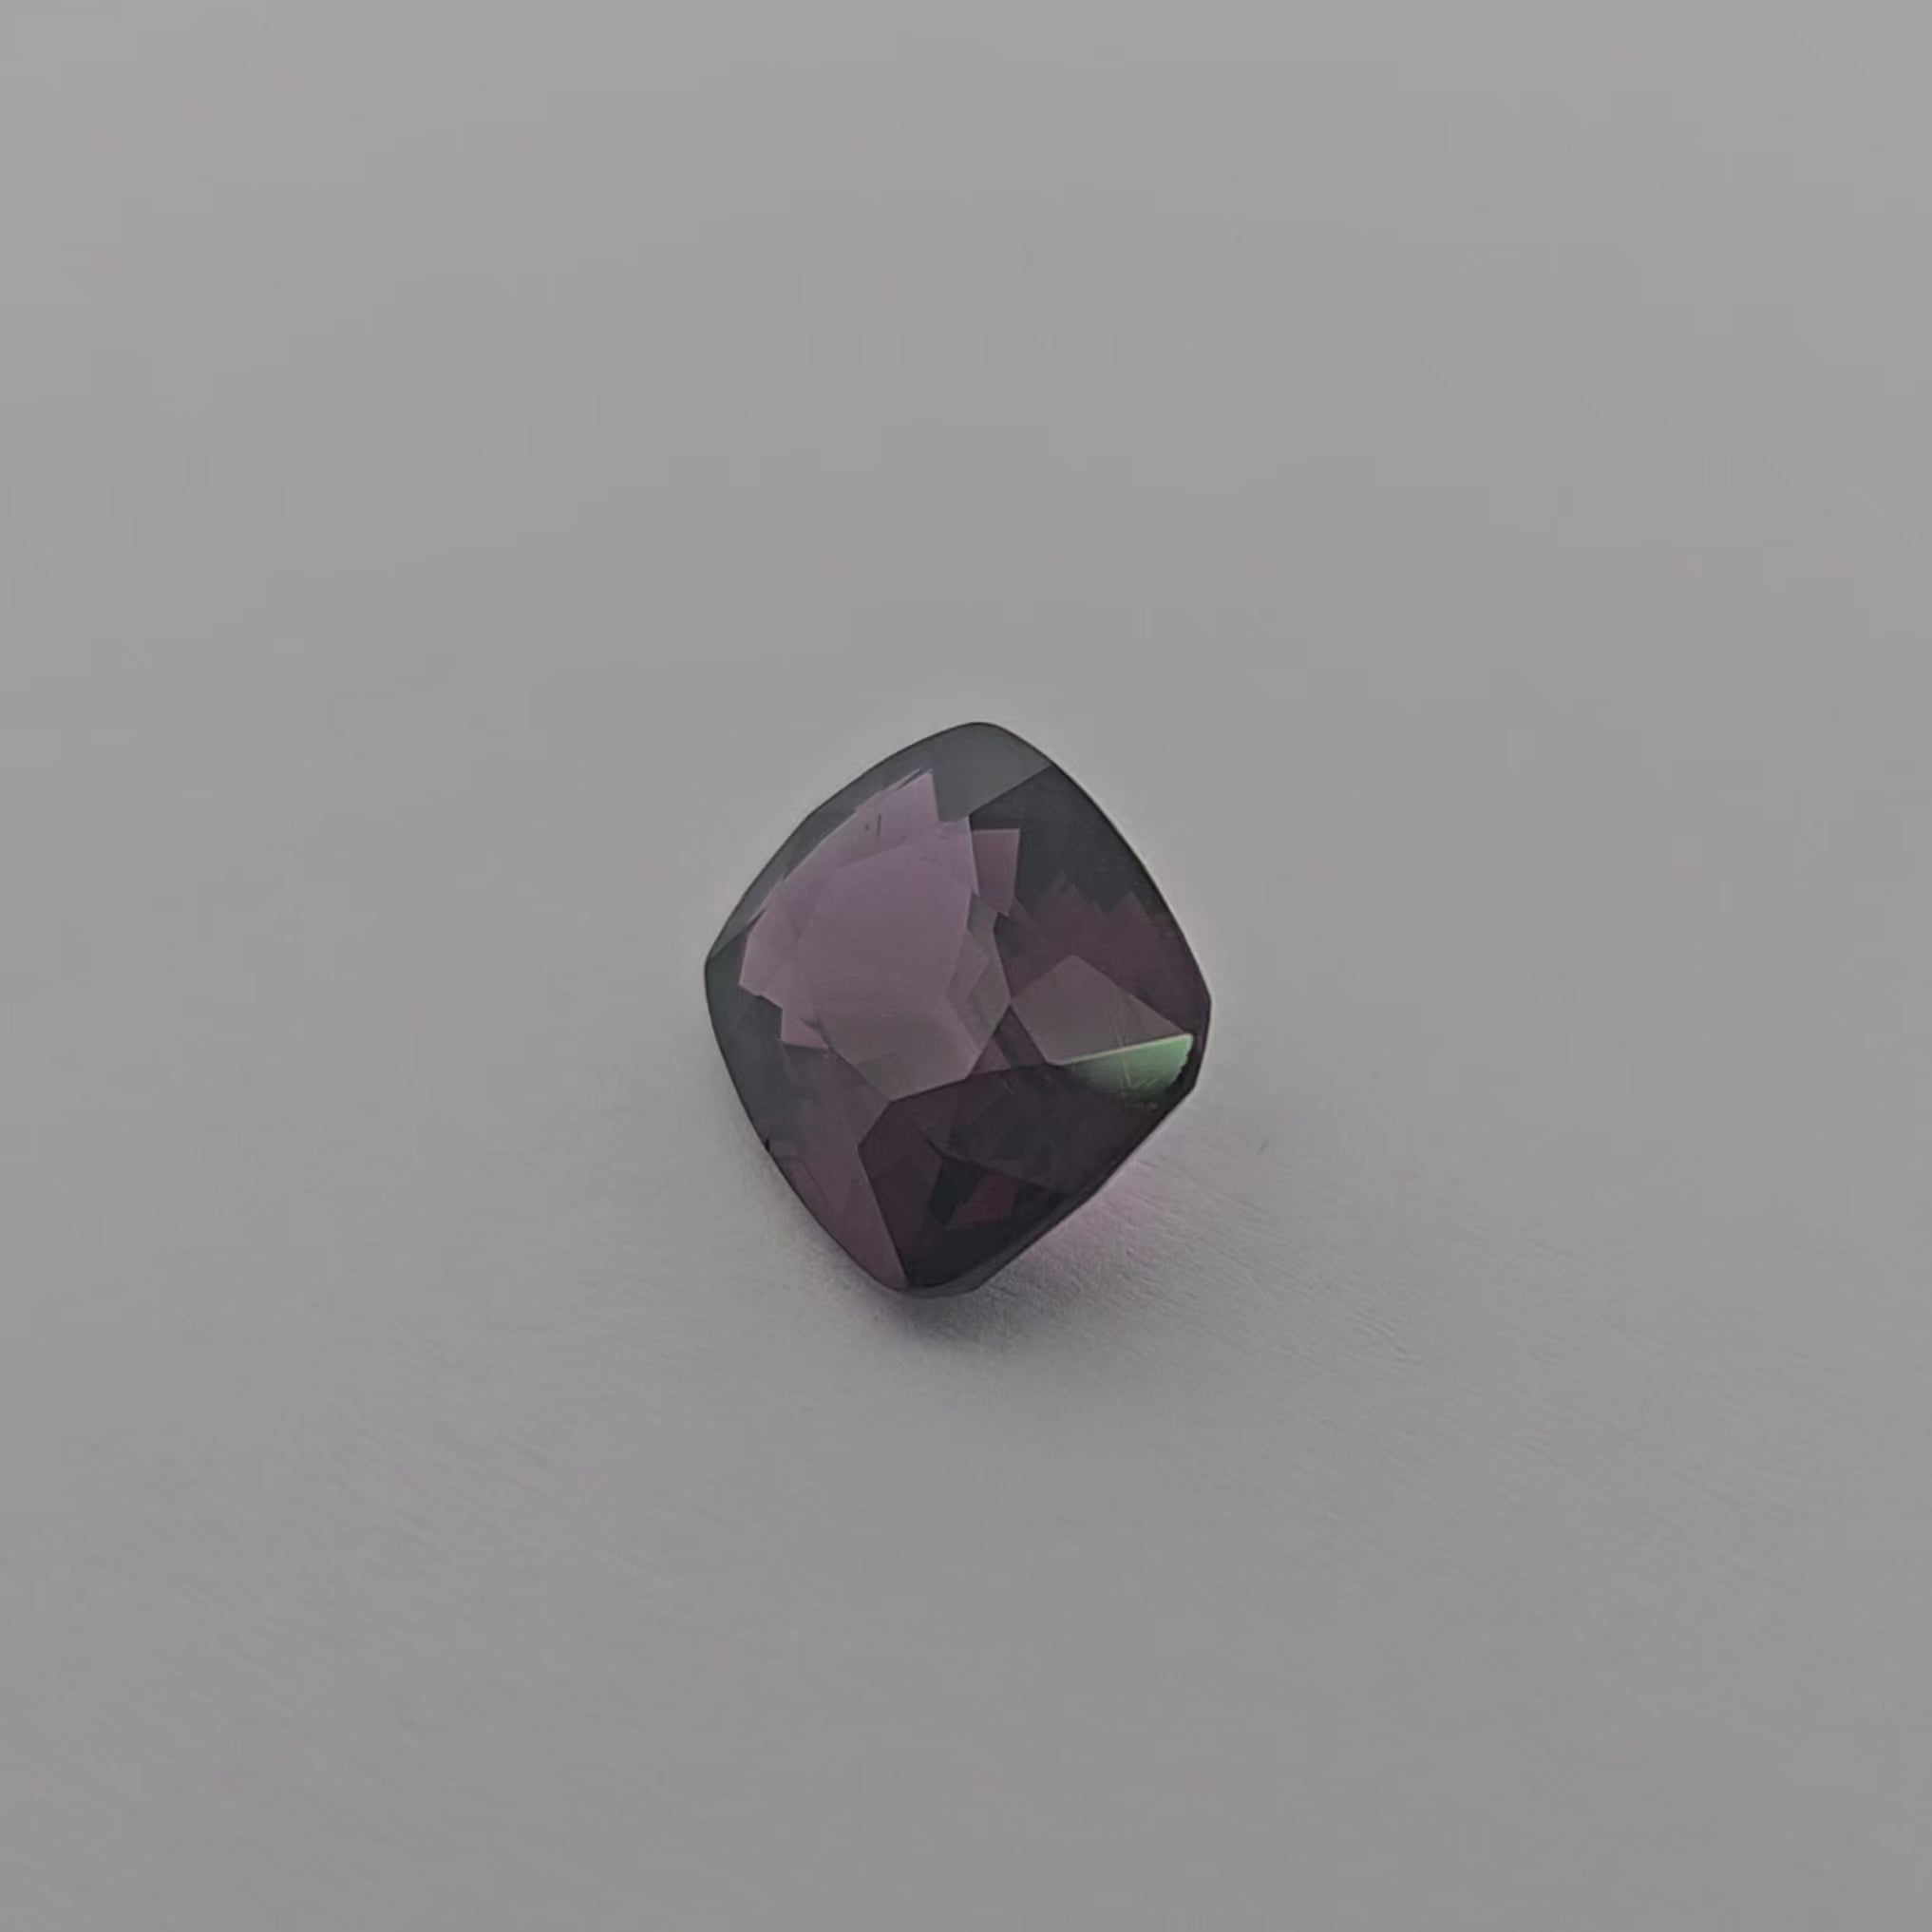 Natural Purple Spinel Stone 4.19 Carats Cushion Shape (11.12 x 8.71 x 5.08 mm) 